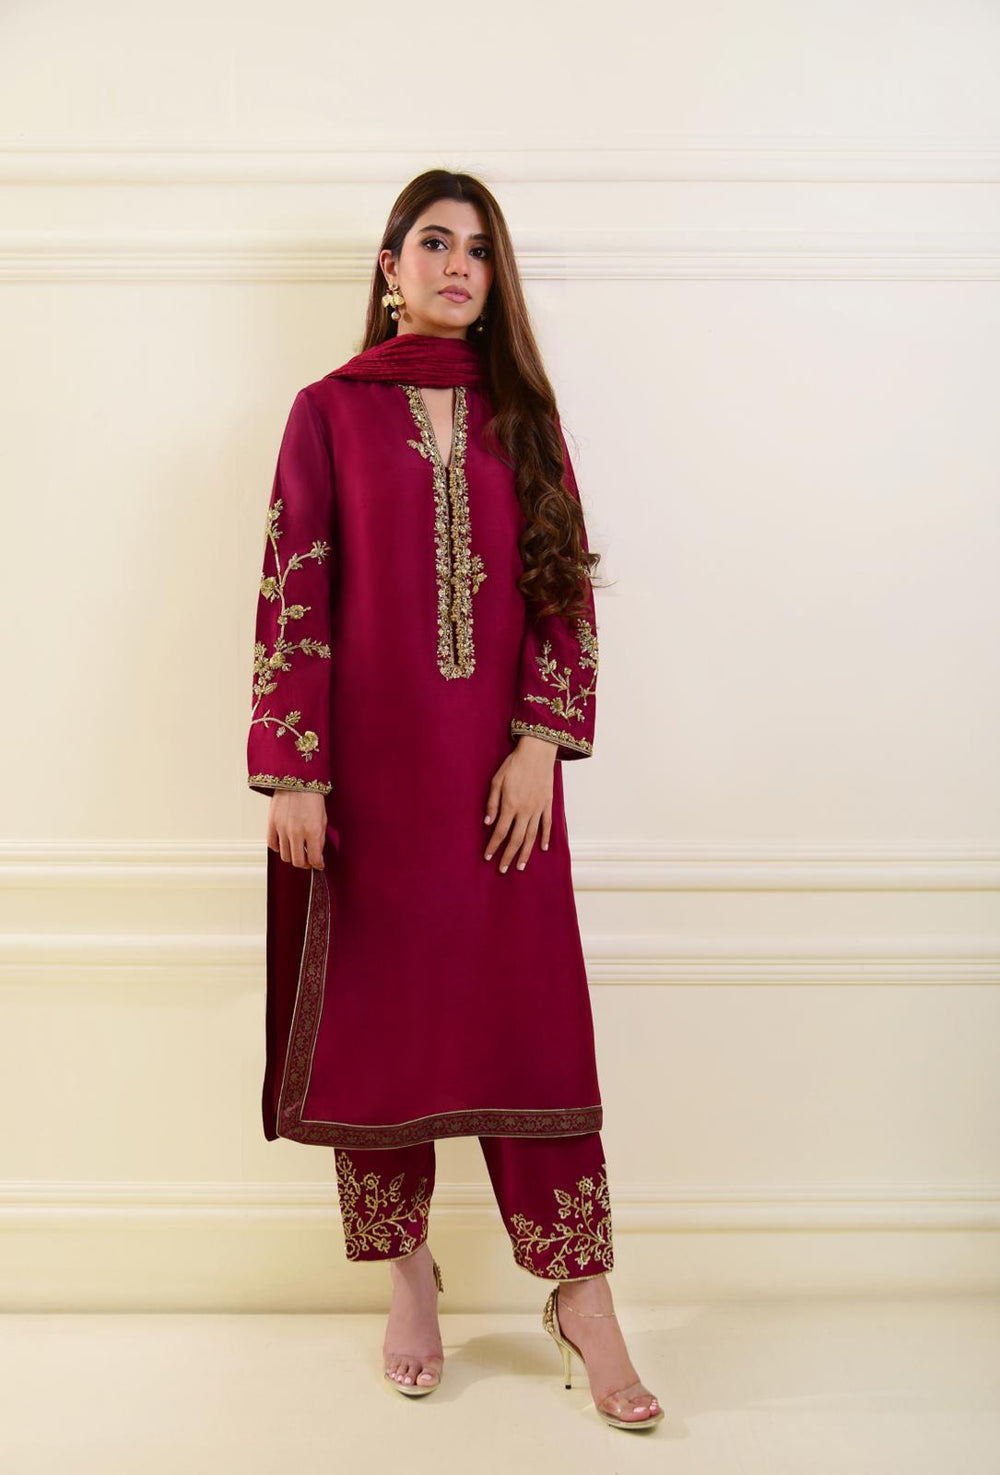 Agha Noor -TWO PIECE 100% PURE CHIFFON HEAVILY EMBROIDERED S105411 –  Nainpreet - The Collective